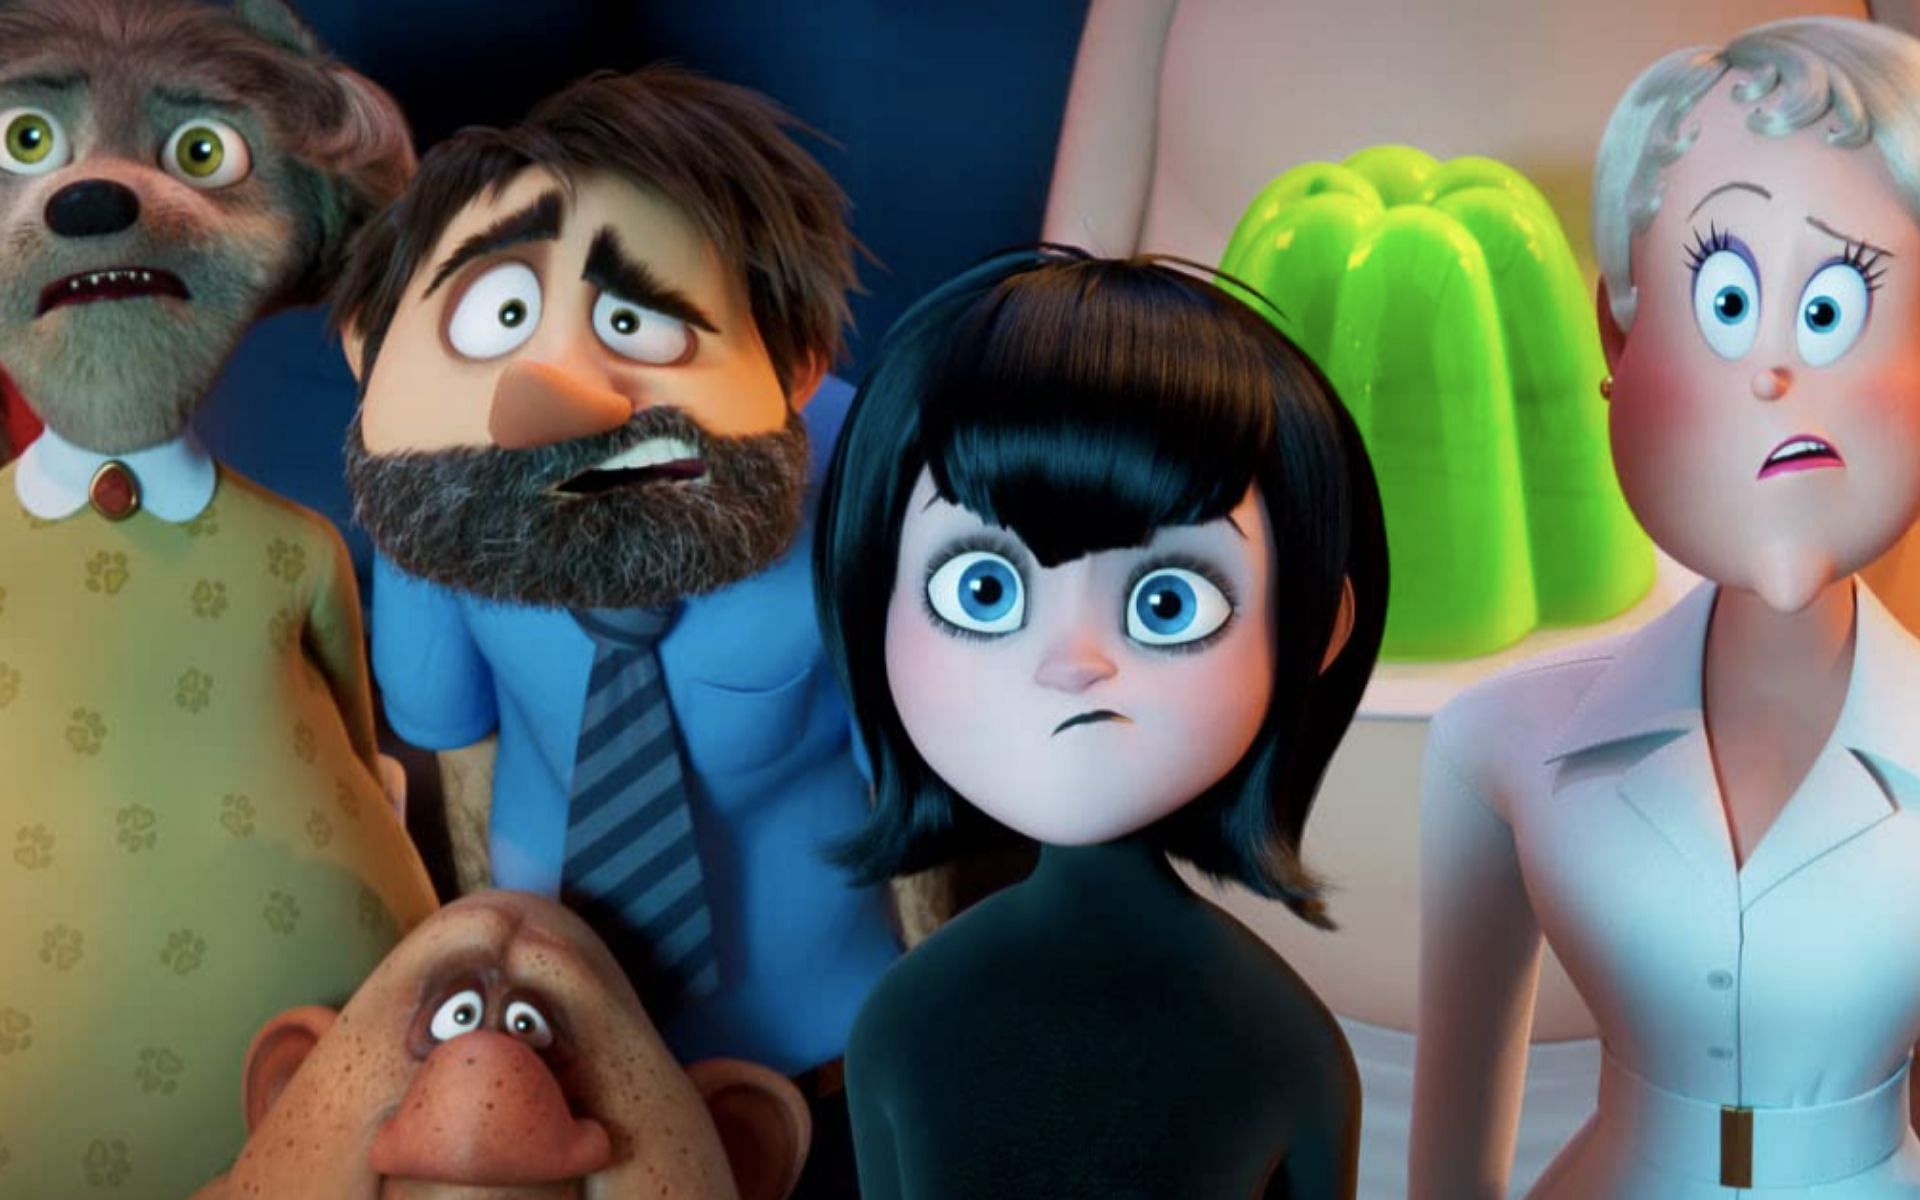 Hotel Transylvania Transformania Voice Cast And Character Guide All About The Animated Film